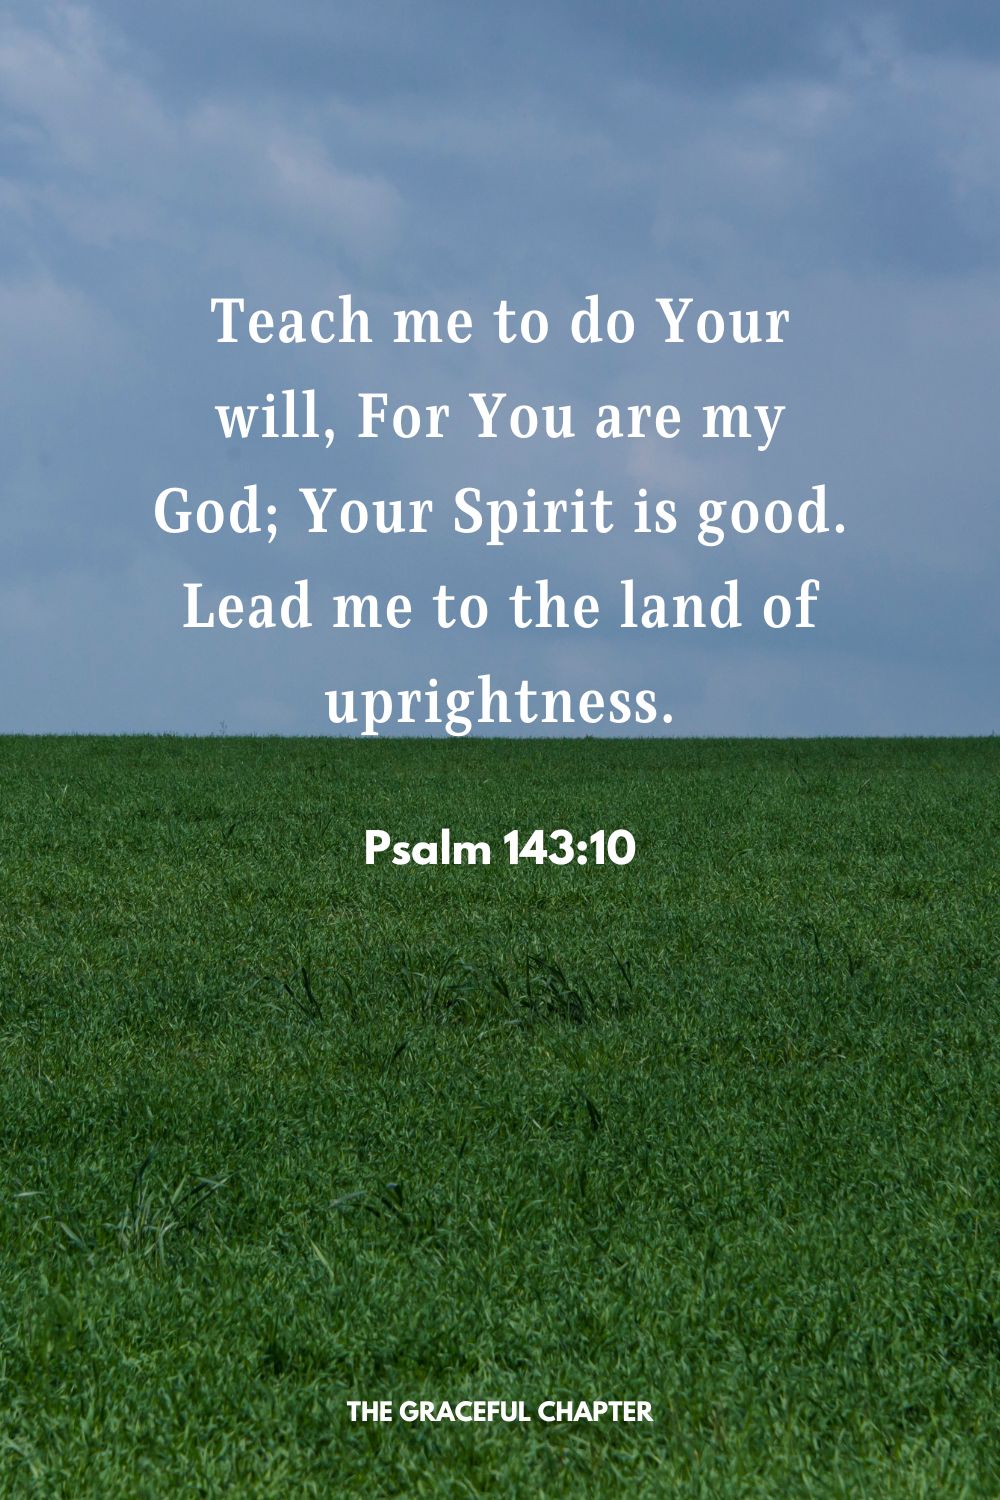 Teach me to do Your will, For You are my God; Your Spirit is good. Lead me to the land of uprightness. Psalm 143:10